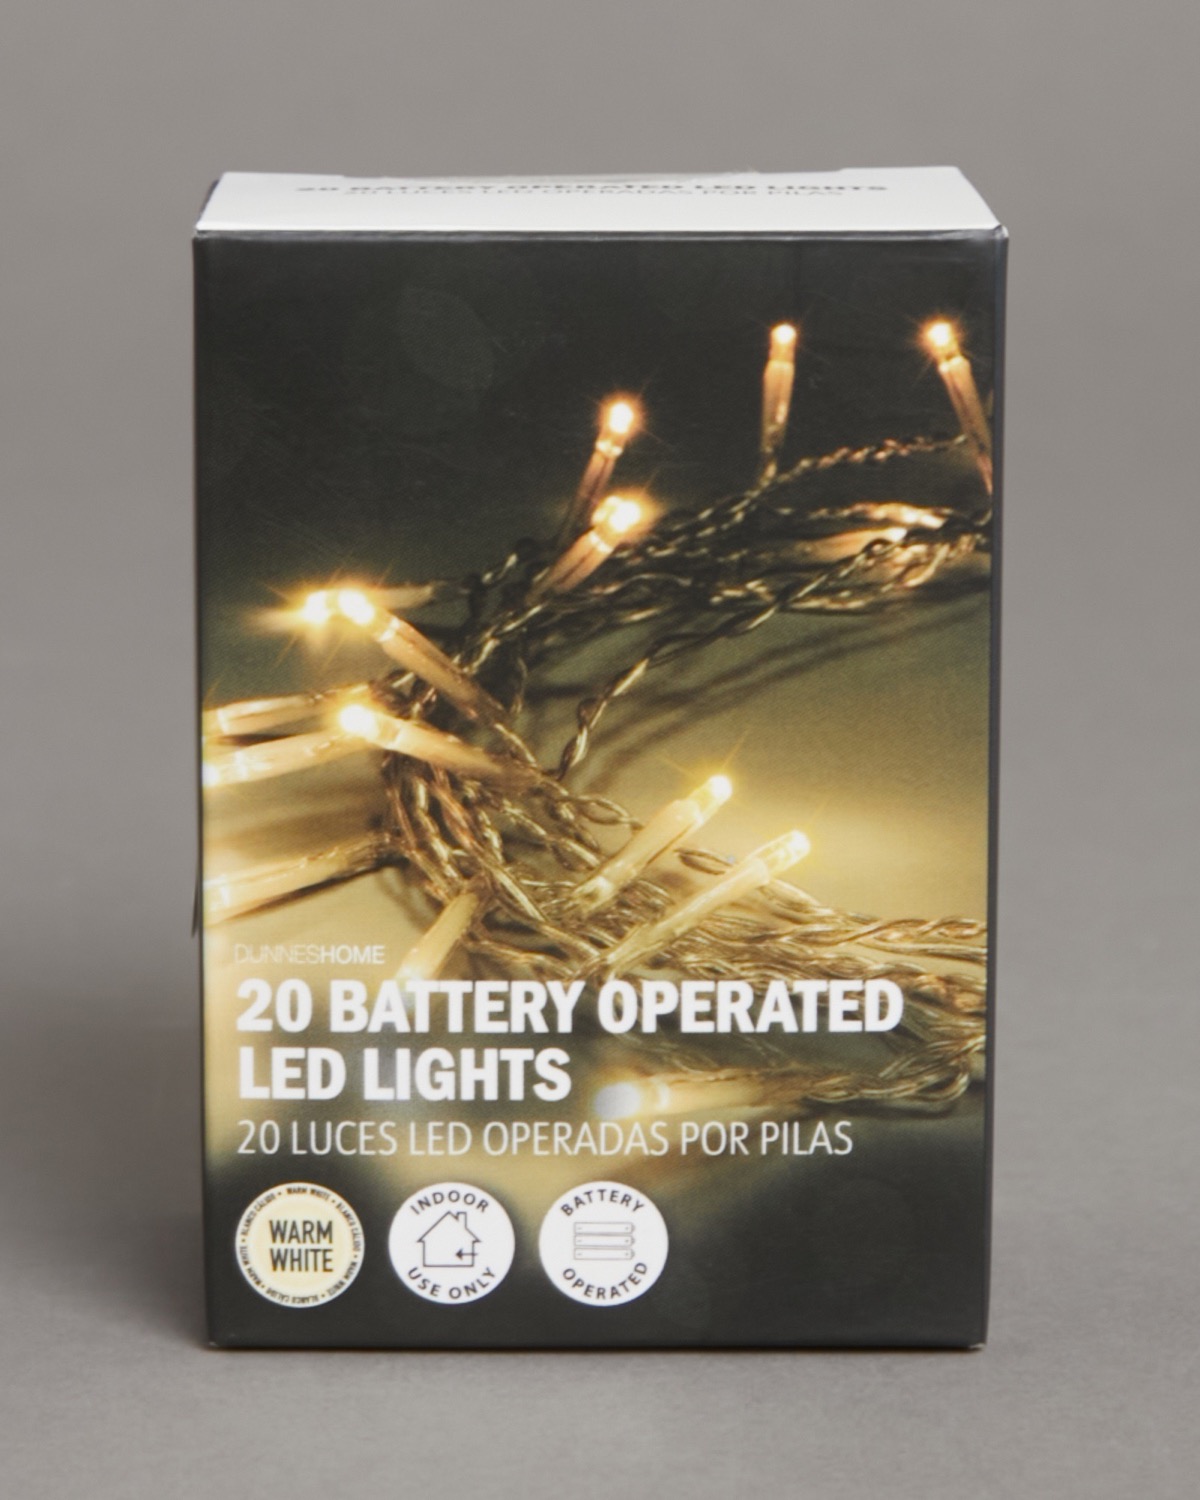 10m Warm White LED Outdoor Lights (Battery Operated) – The